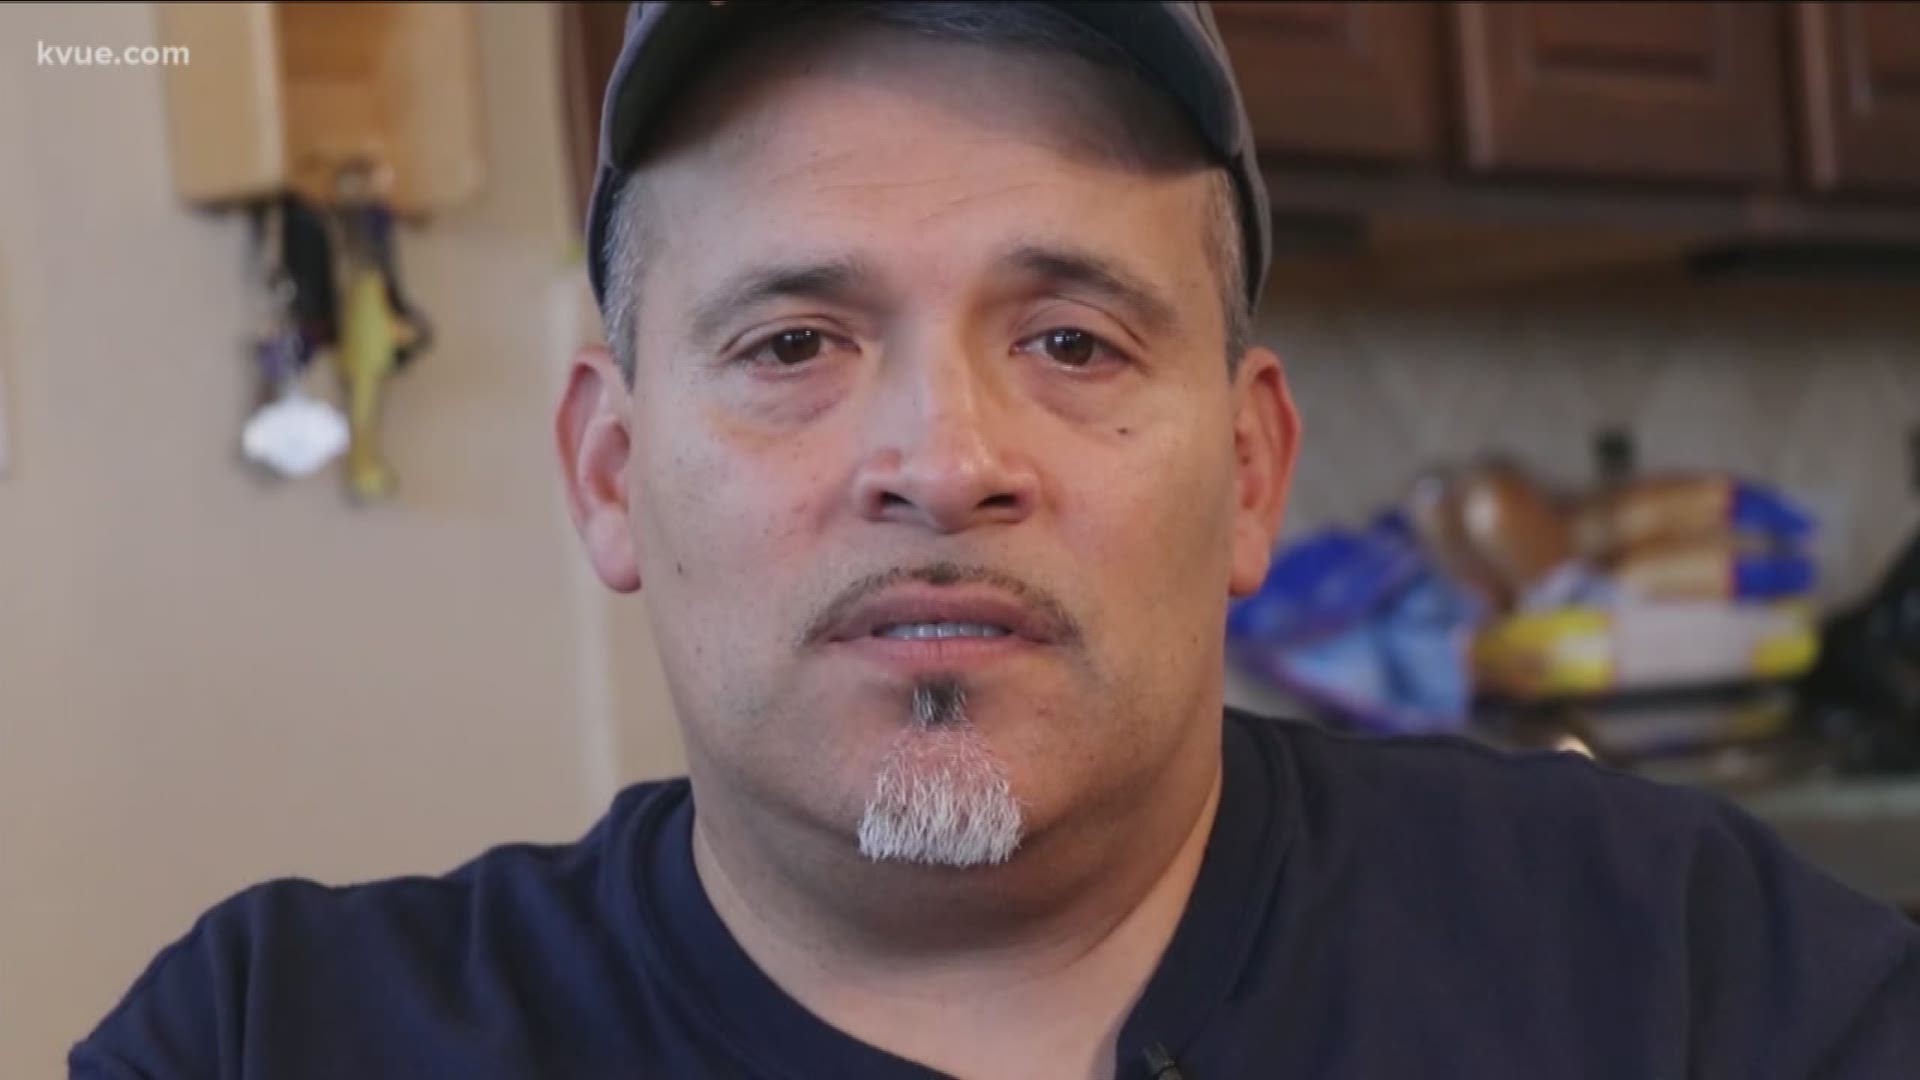 Louis Ugarte's heart doesn't pump what it should. He has cardiomyopathy, which is 100 percent connected to his time in the U.S. Air Force.

But government red tape is putting the Central Texas veteran's life at risk.